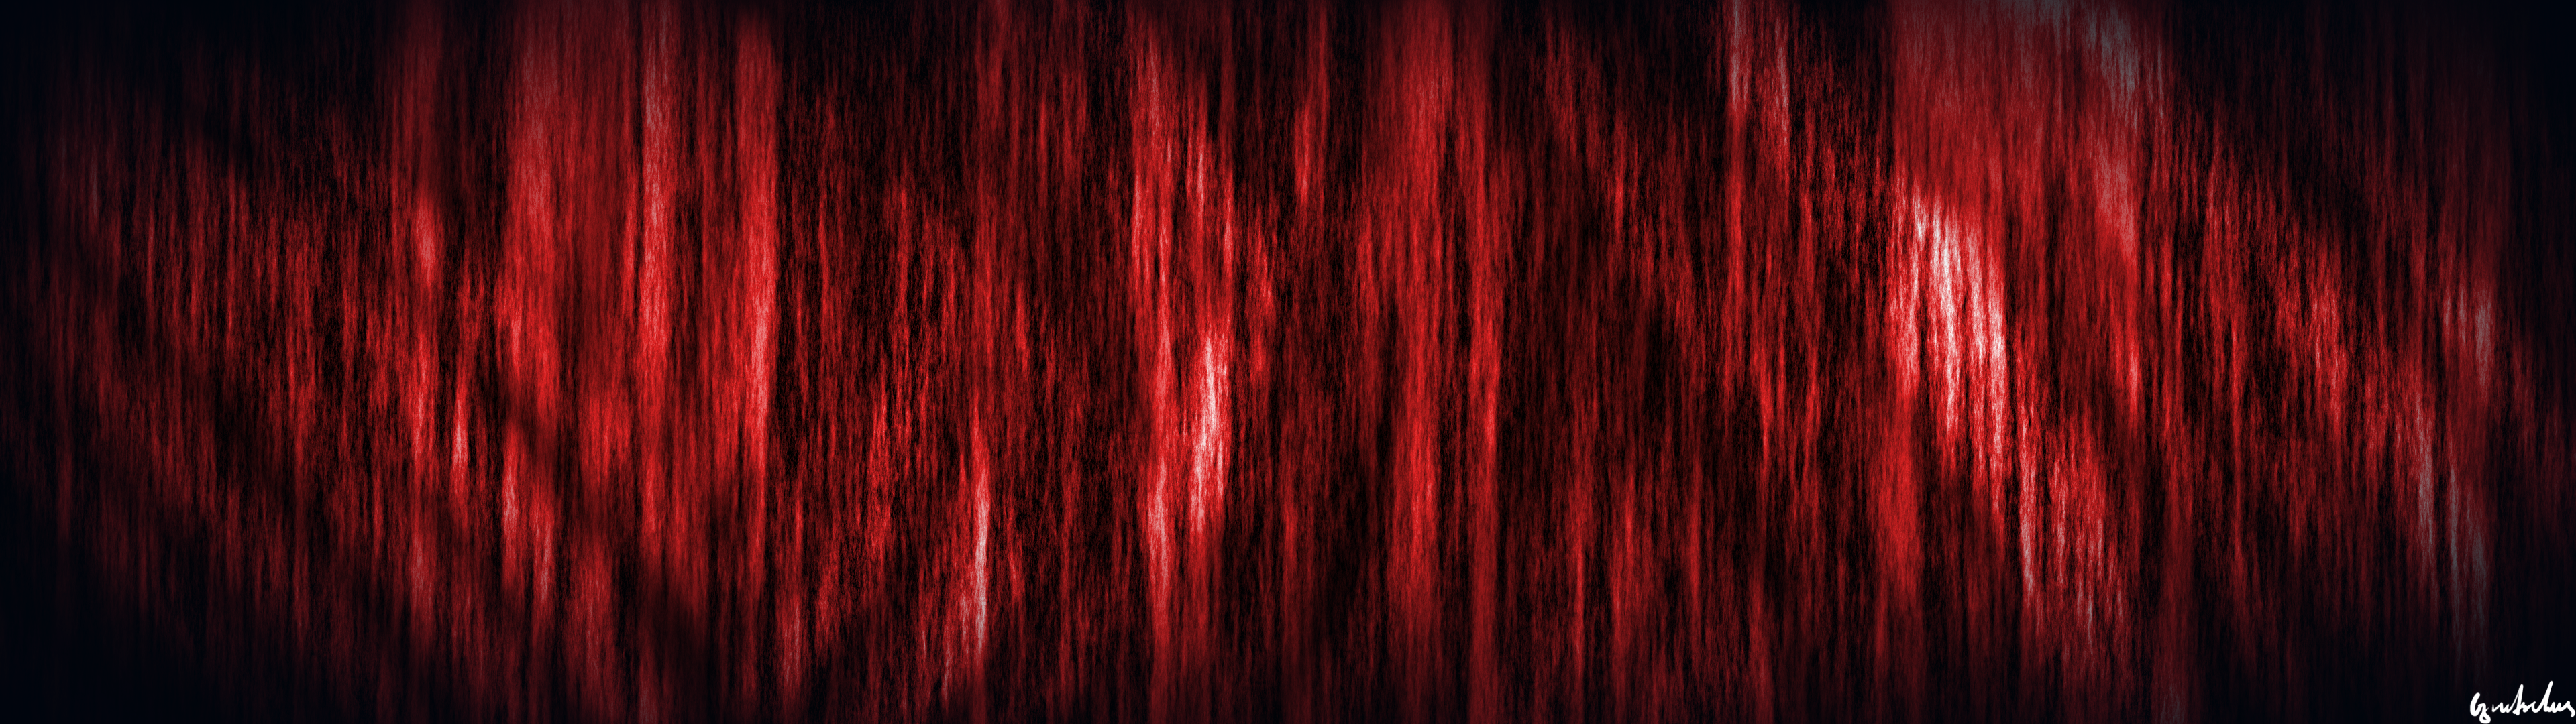 Red Wallpaper Free 3840x1080 Red Background